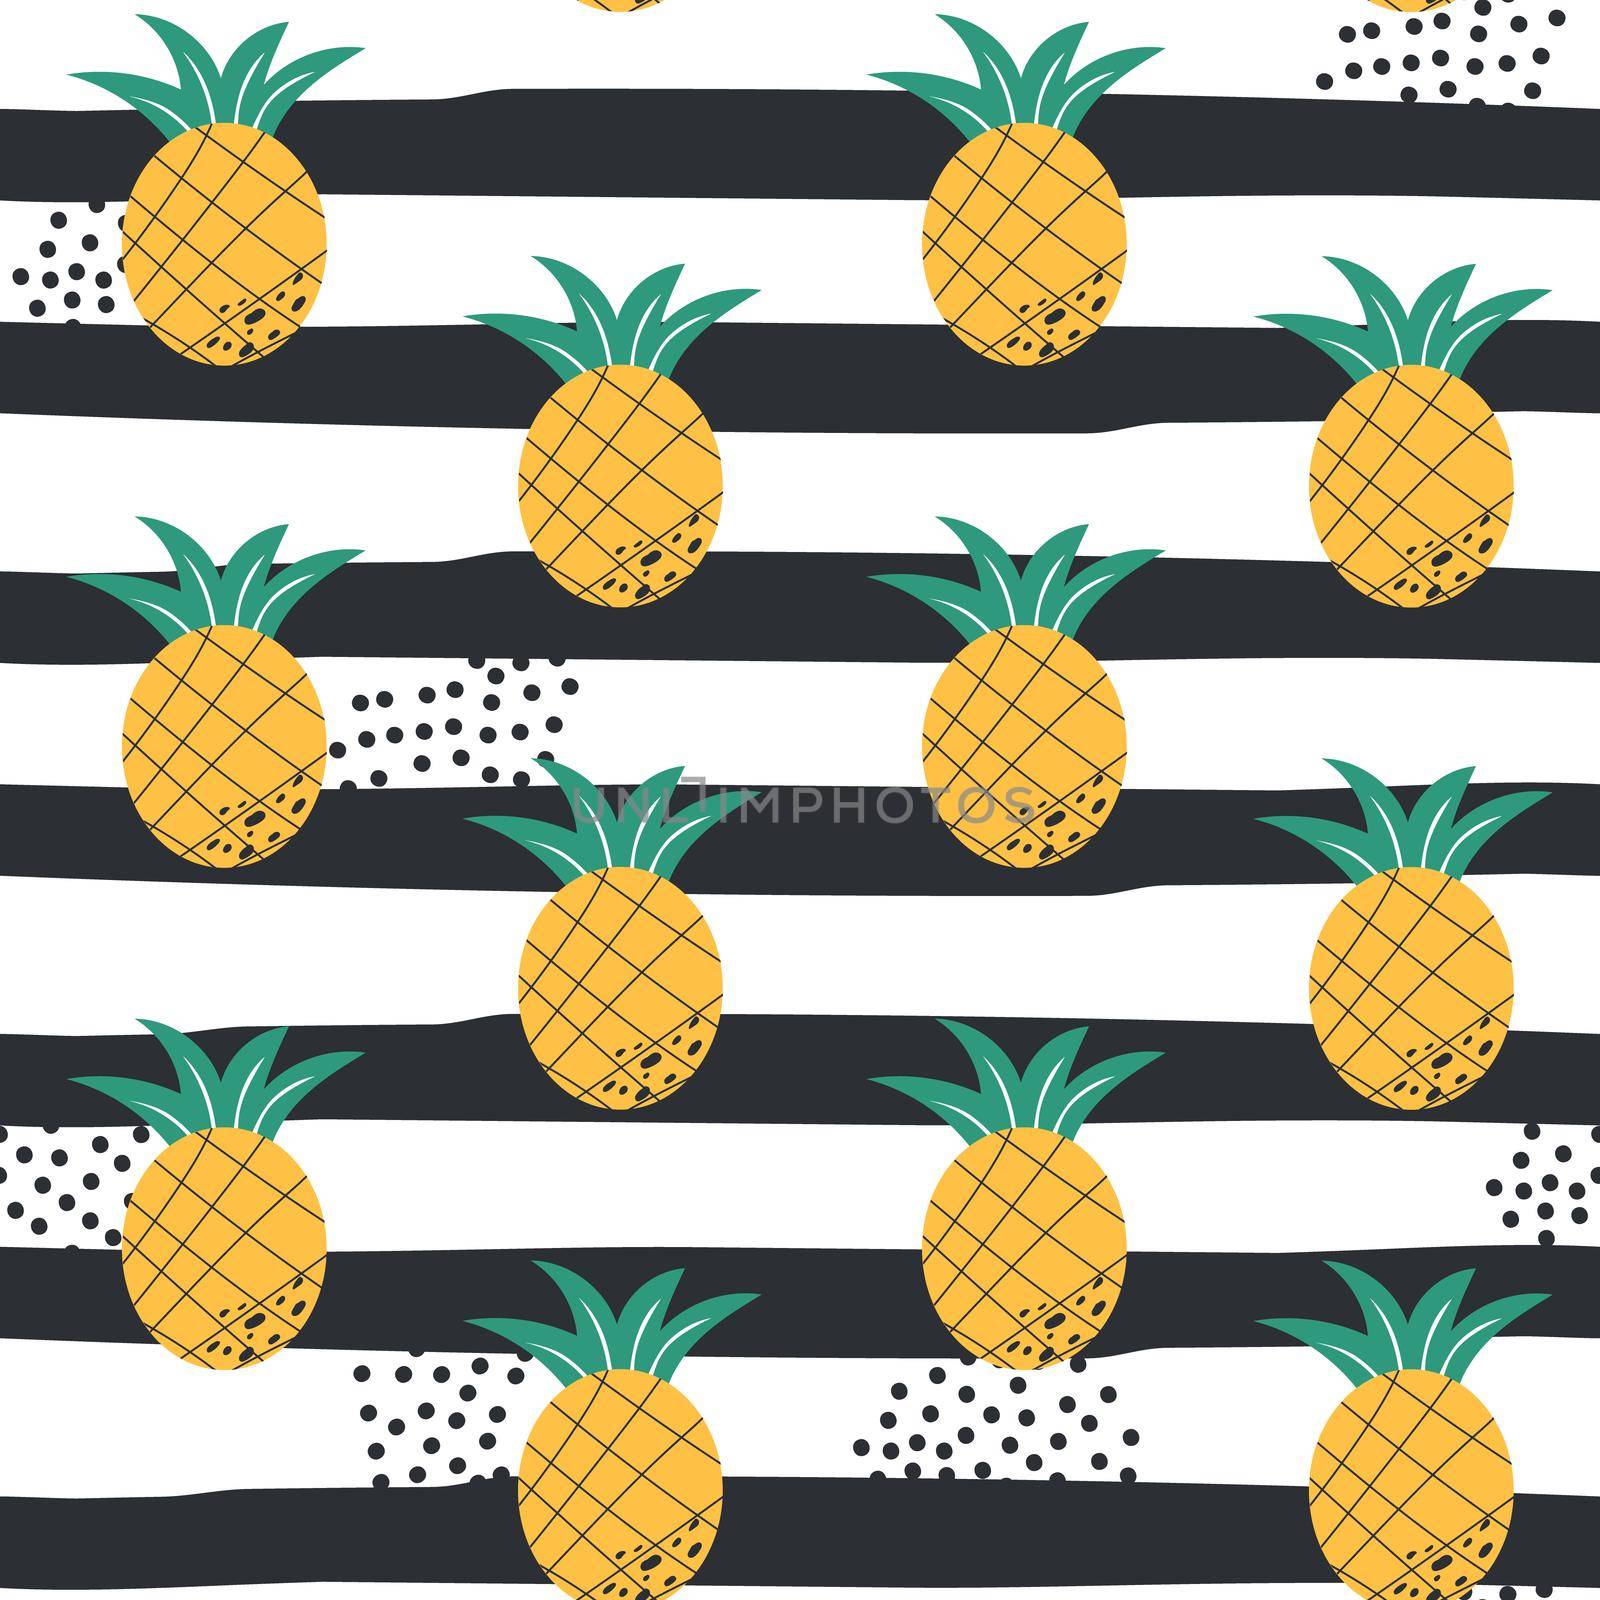 Vector seamless summer pattern with pineapples on black and white striped background. Hand drawn style pattern